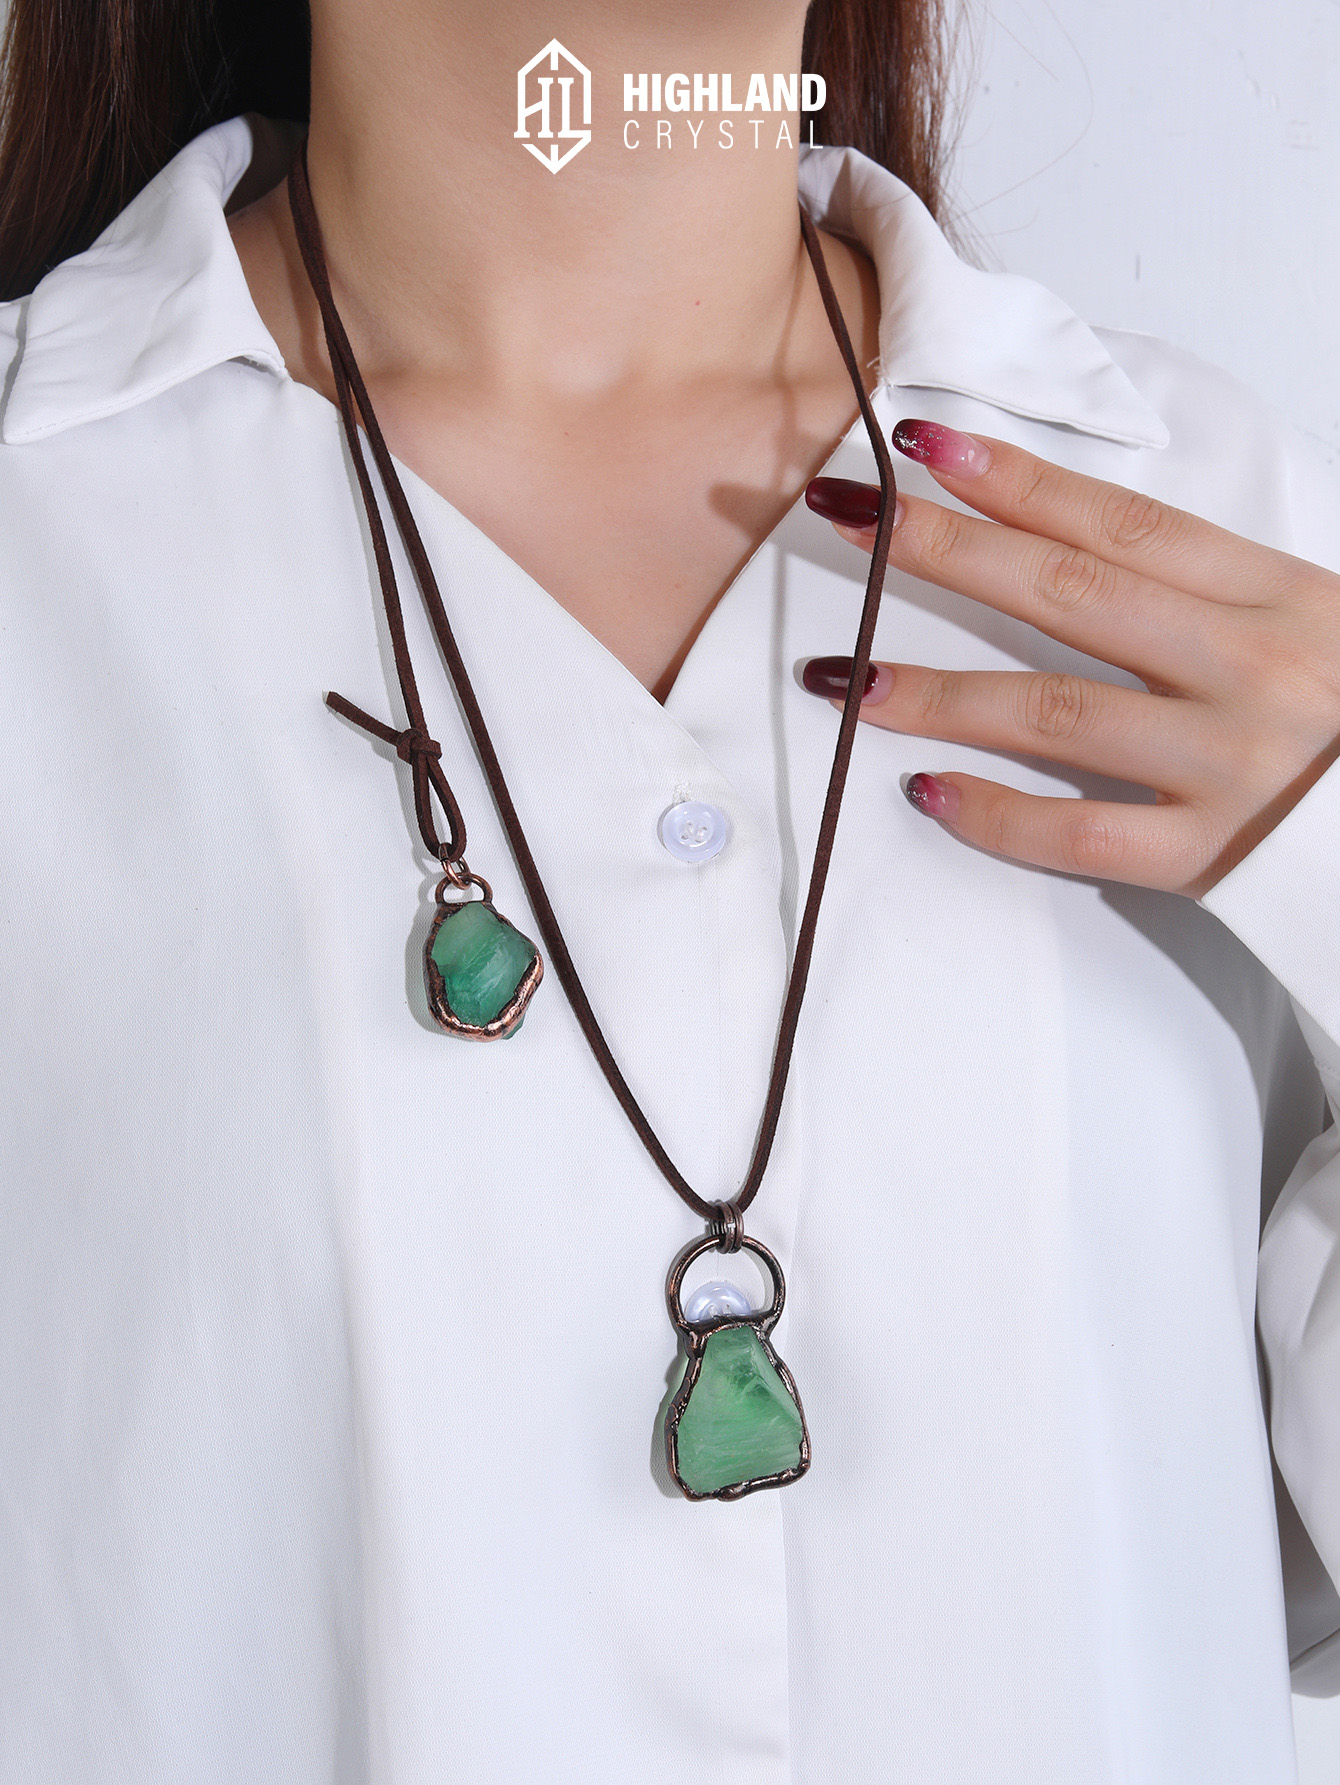 Fluorite Necklace With Leather Cord Classic Style For Daily Wear Crystal Jewelry For Woman